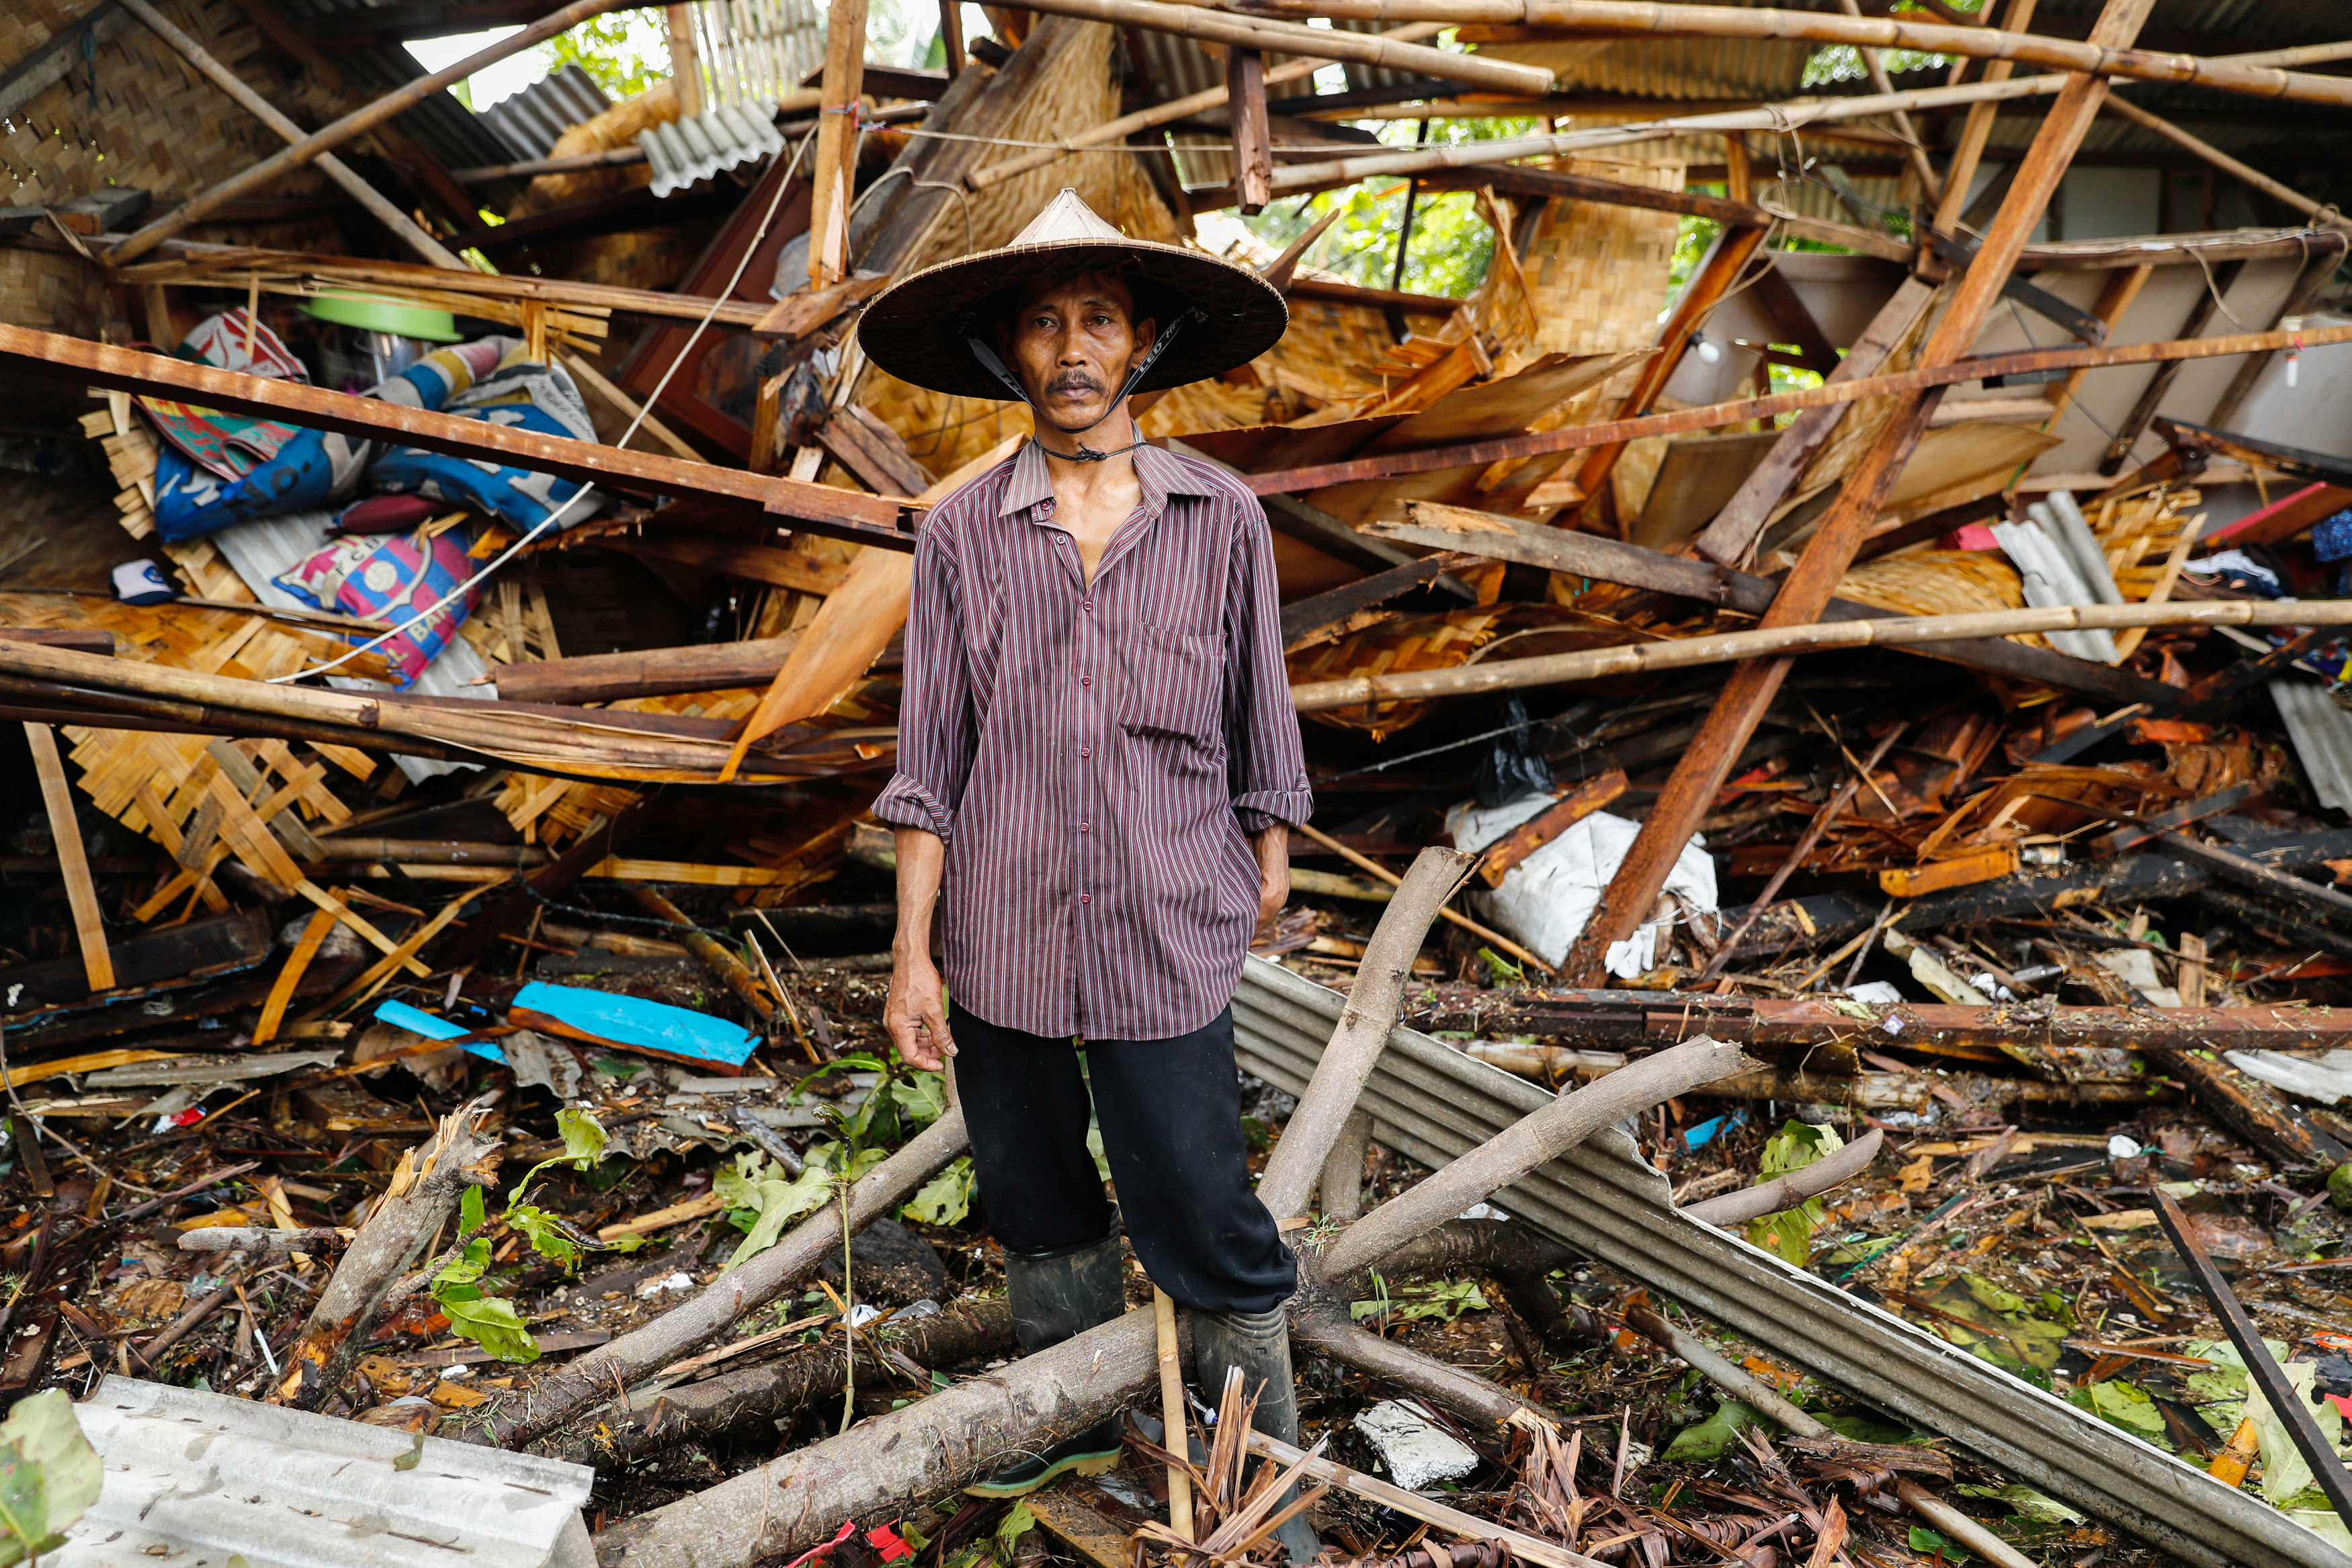 Catholic Relief Services working in Indonesia to assess needs of tsunami survivors